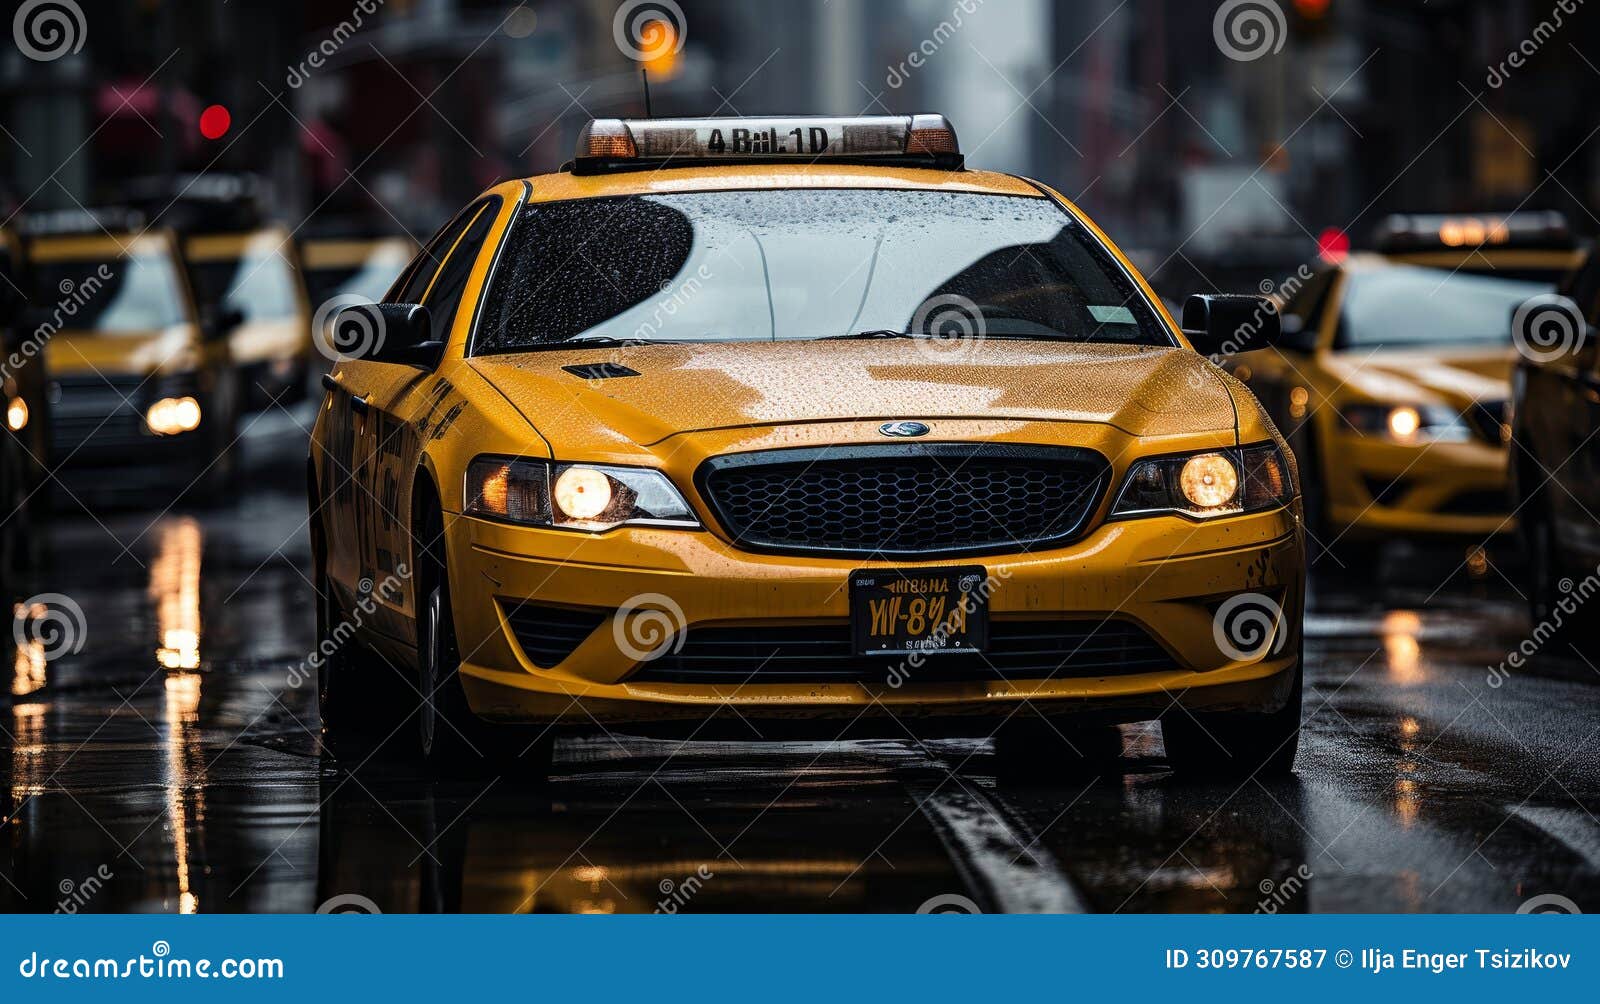 vibrant nyc street with blurry motion of yellow cabs in downtown 16k highquality urban image